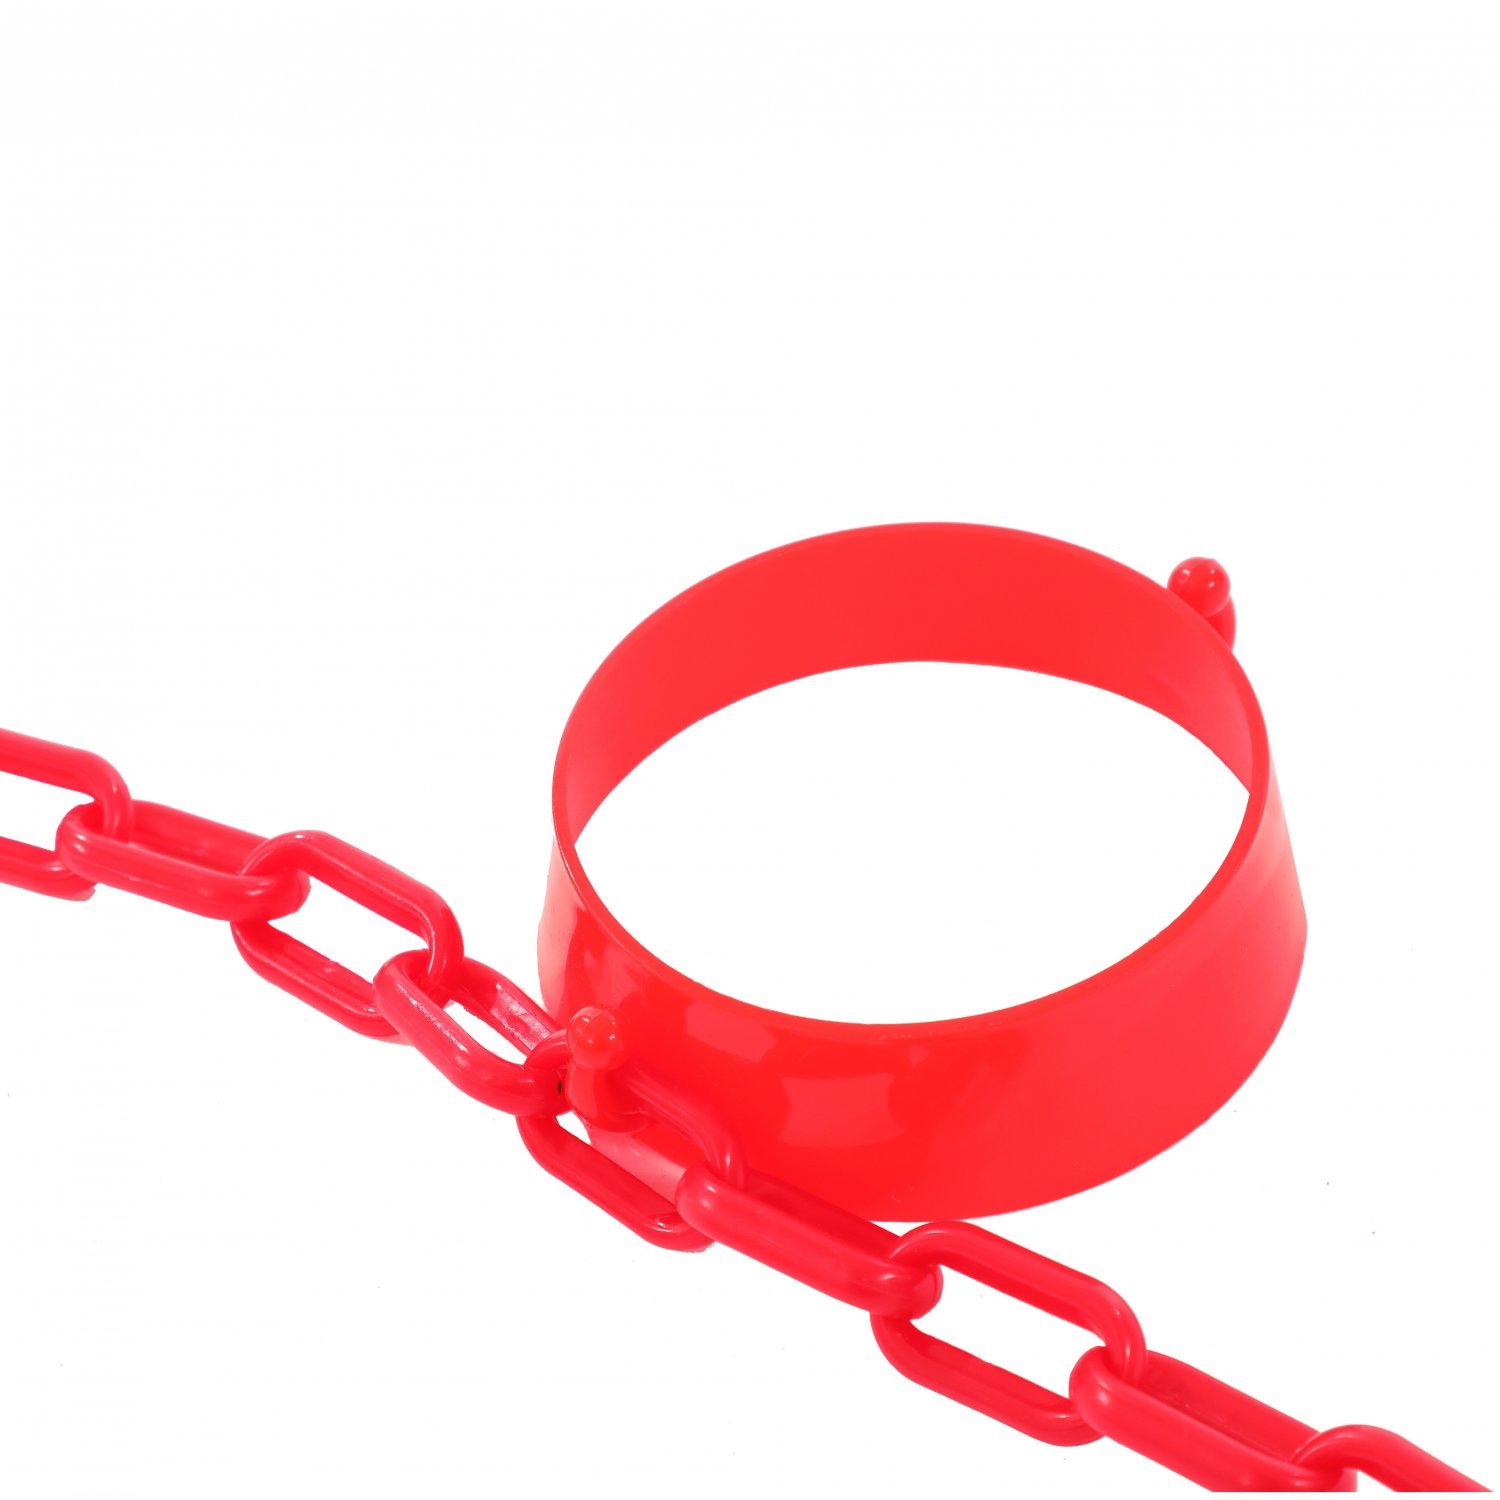 Set of 5 Chain Holders Including 5m Red Plastic Barrier For Road Cones NEW